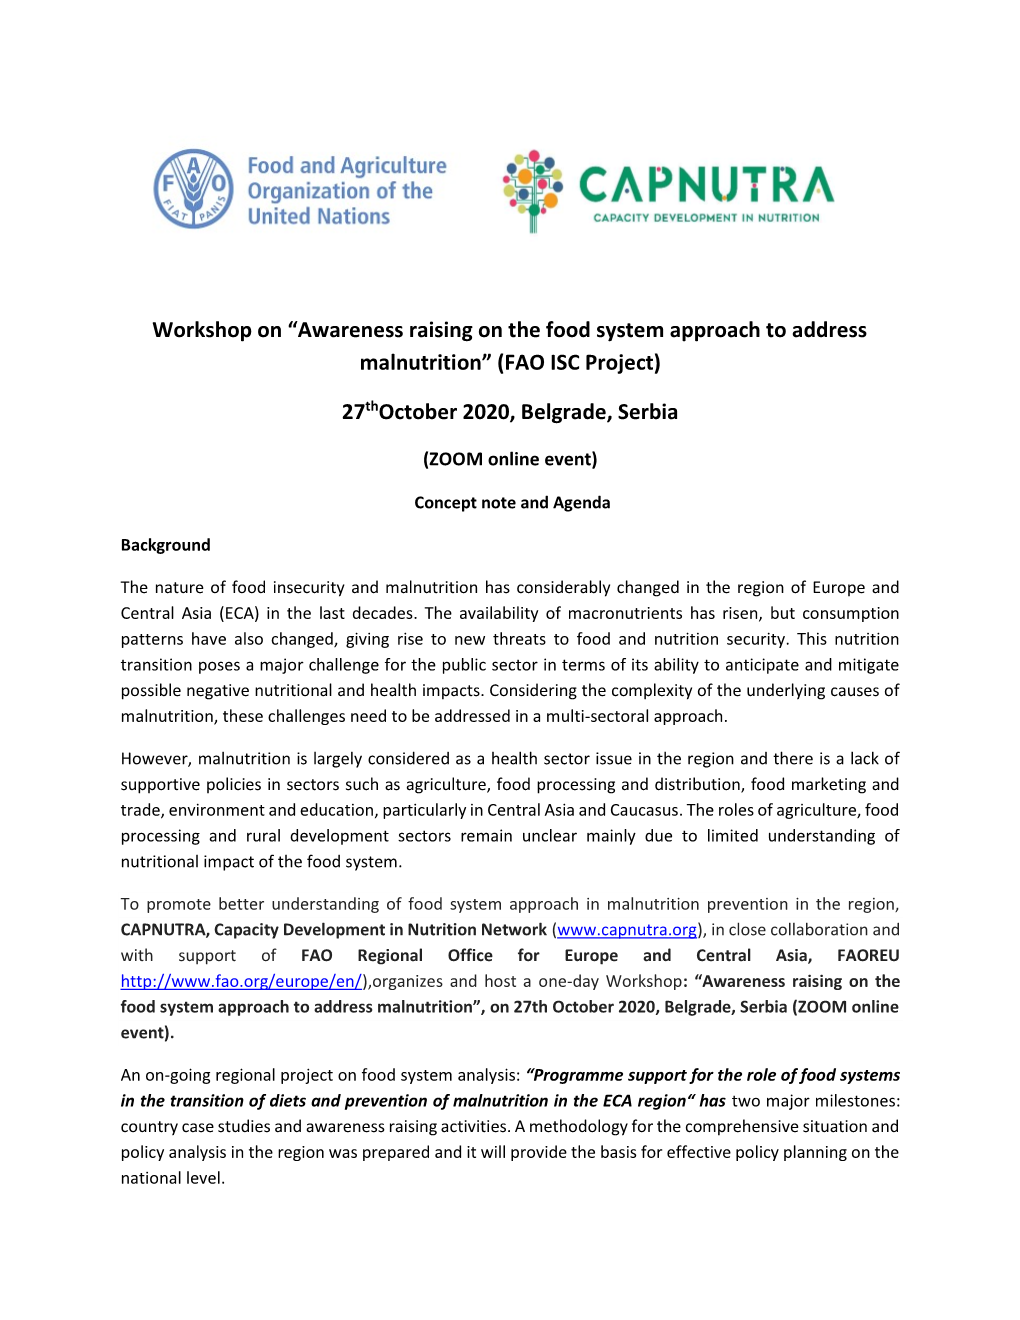 Workshop on “Awareness Raising on the Food System Approach to Address Malnutrition” (FAO ISC Project) 27Thoctober 2020, Belg